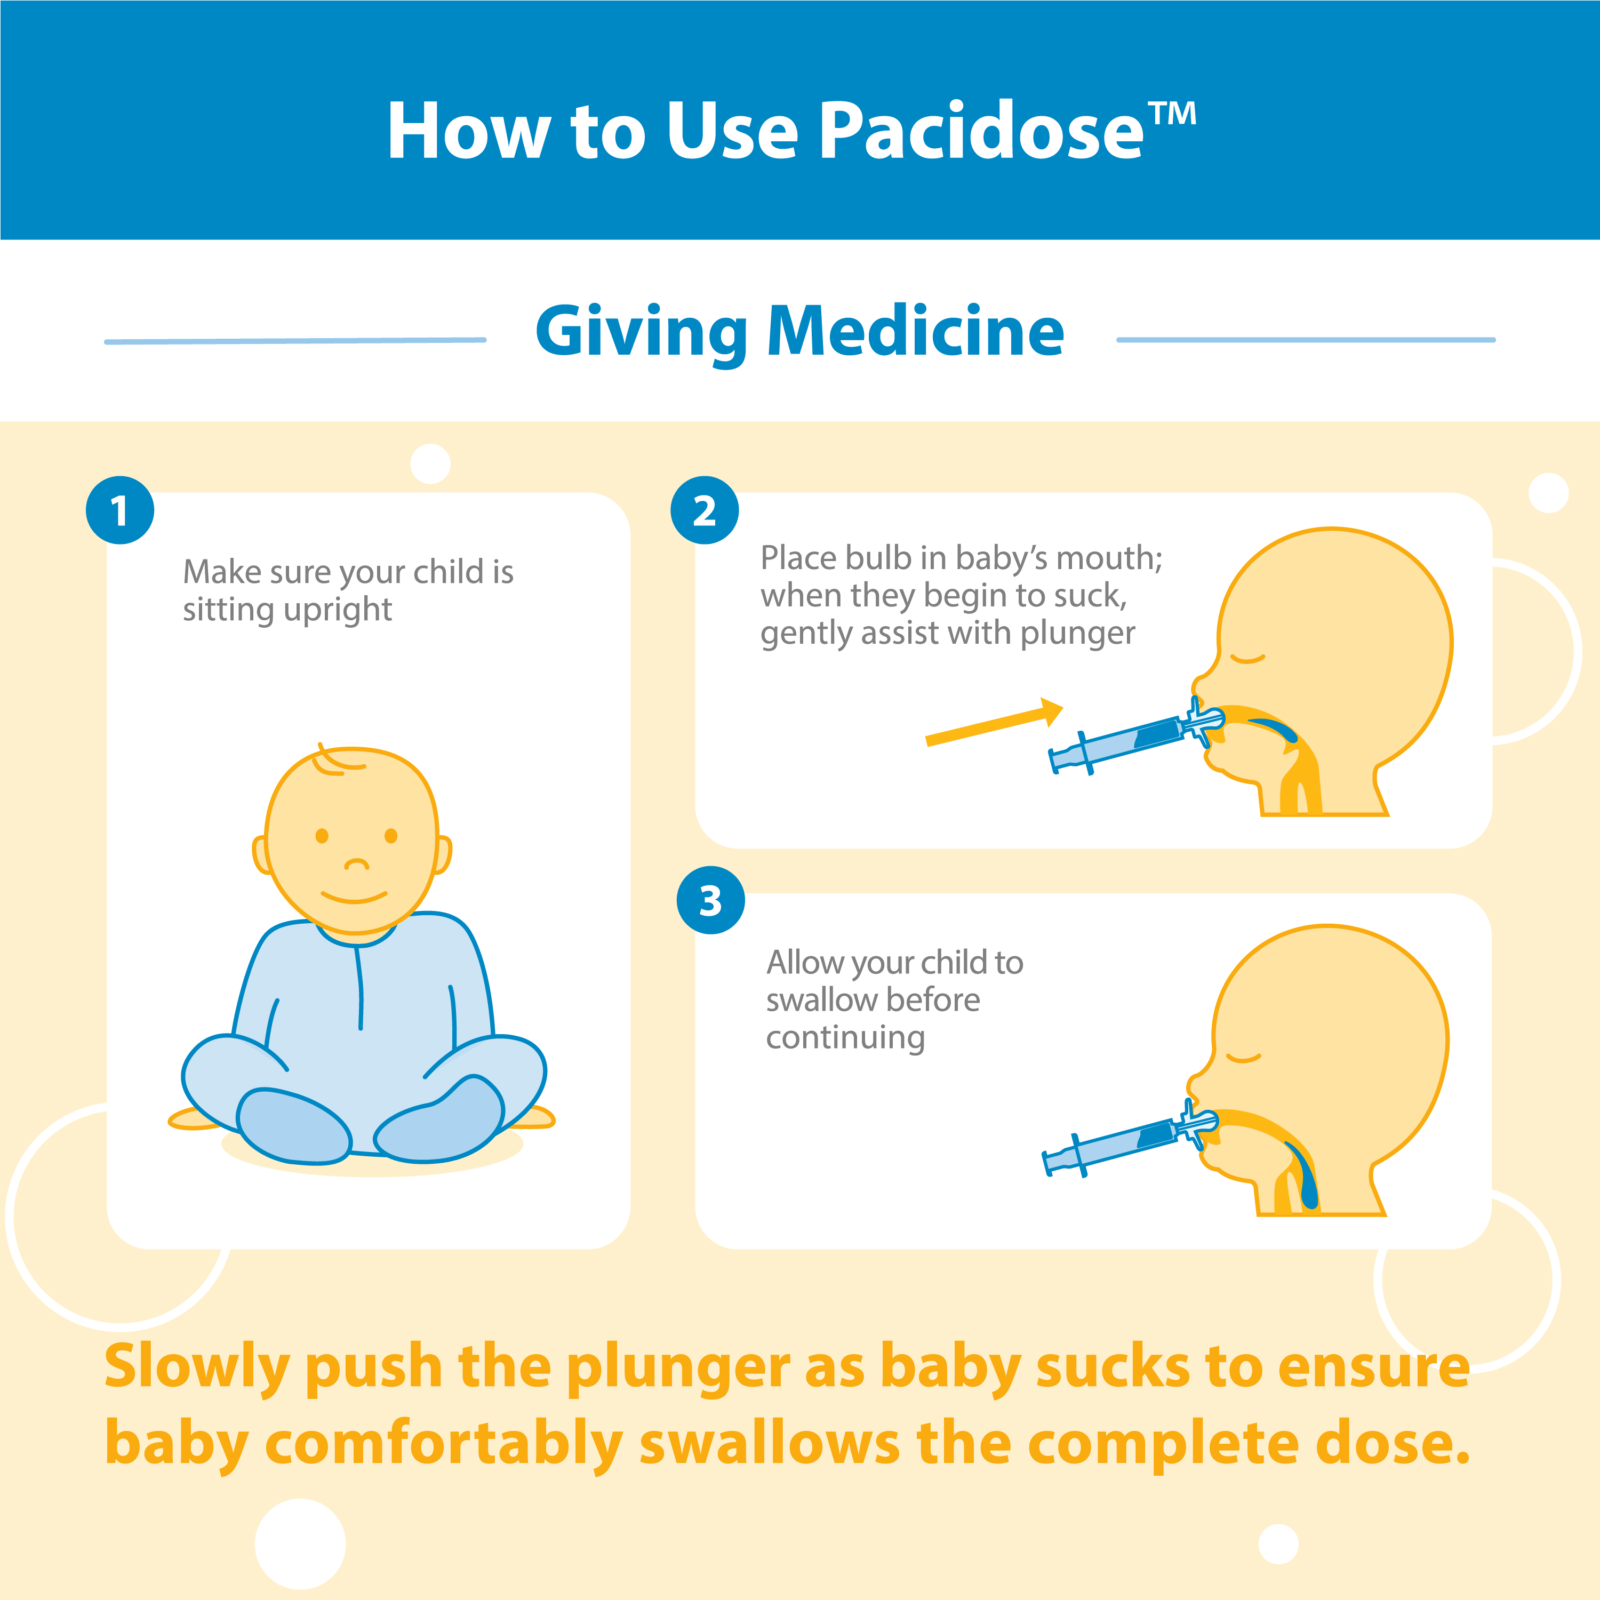 How to Use Pacidose: Giving Medicine 1. Make sure your child is sitting upright. 2. Place bulb in baby’s mouth. When they begin to suck, gently assist with syringe 3. Allow your child to swallow before continuing. Slowly push the plunger as baby sucks to ensure baby comfortably swallows the complete dose